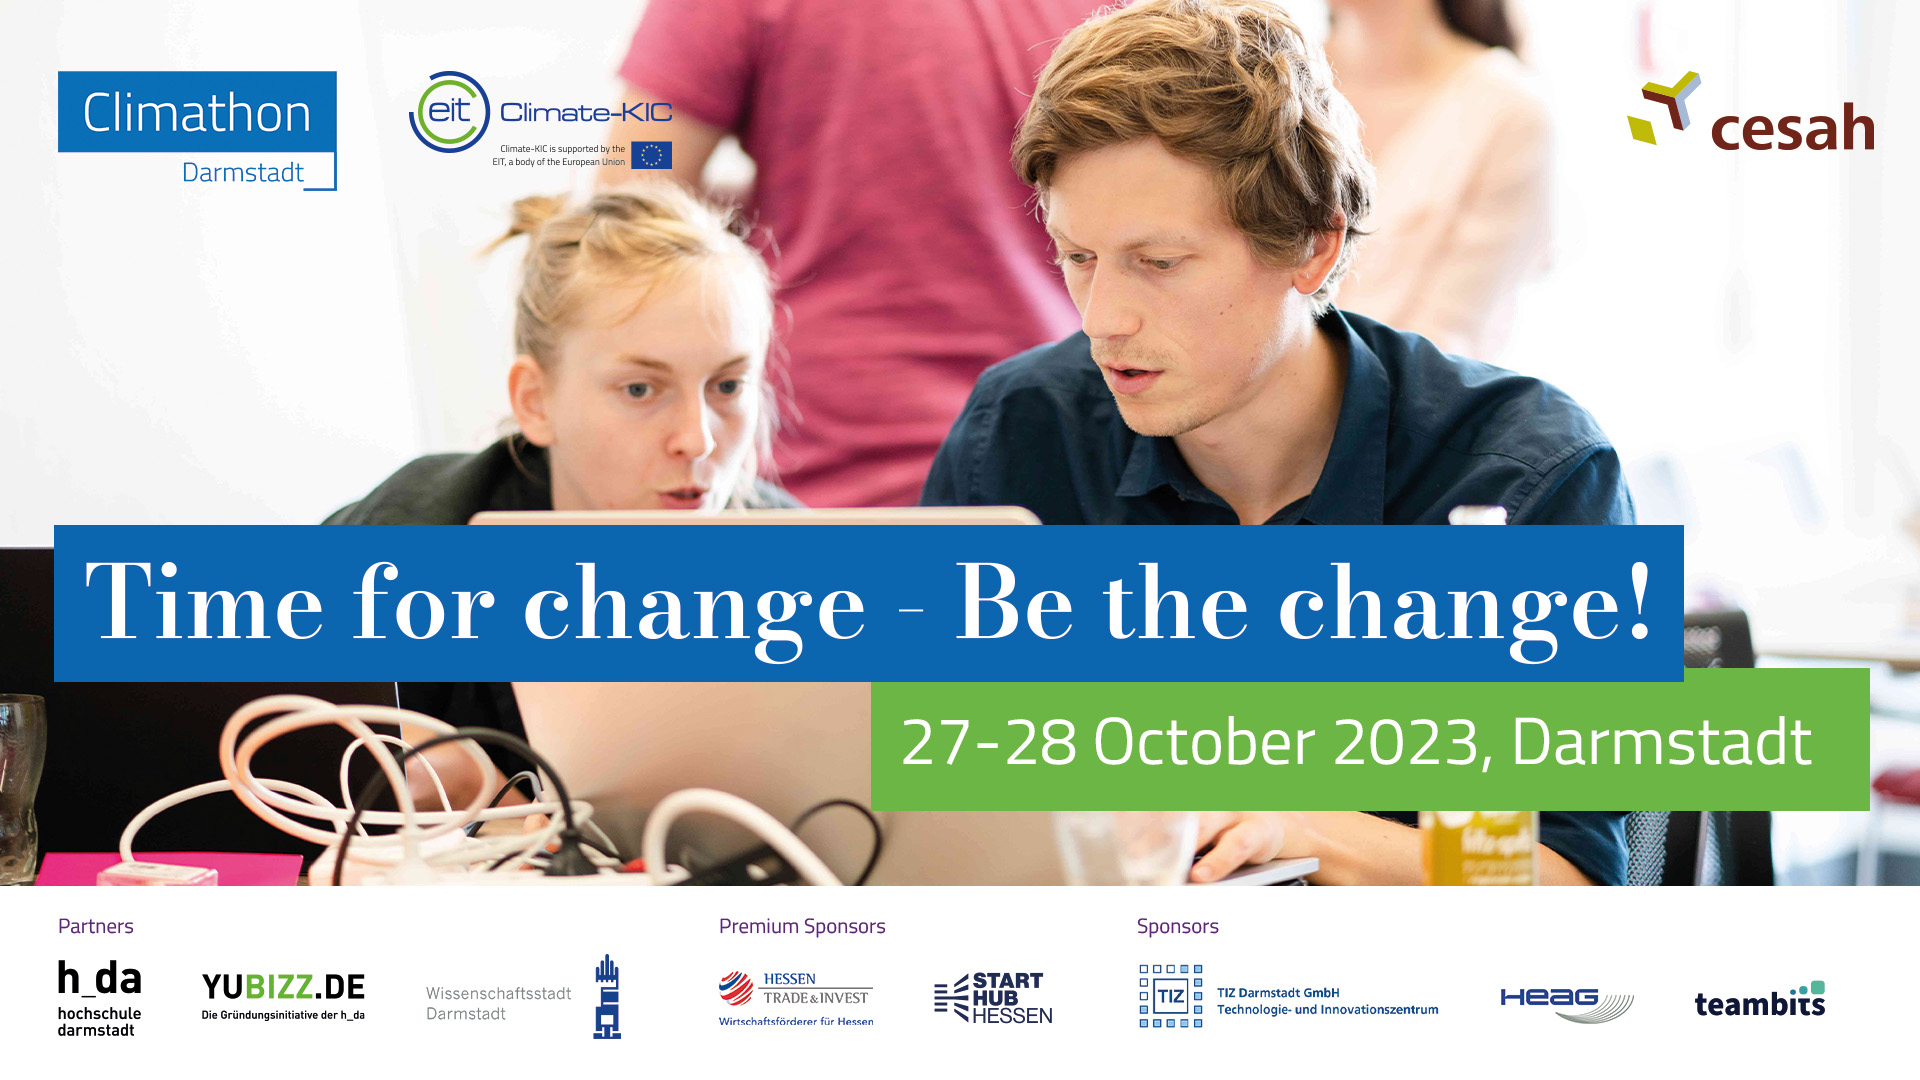 Climathon is coming back to Darmstadt!